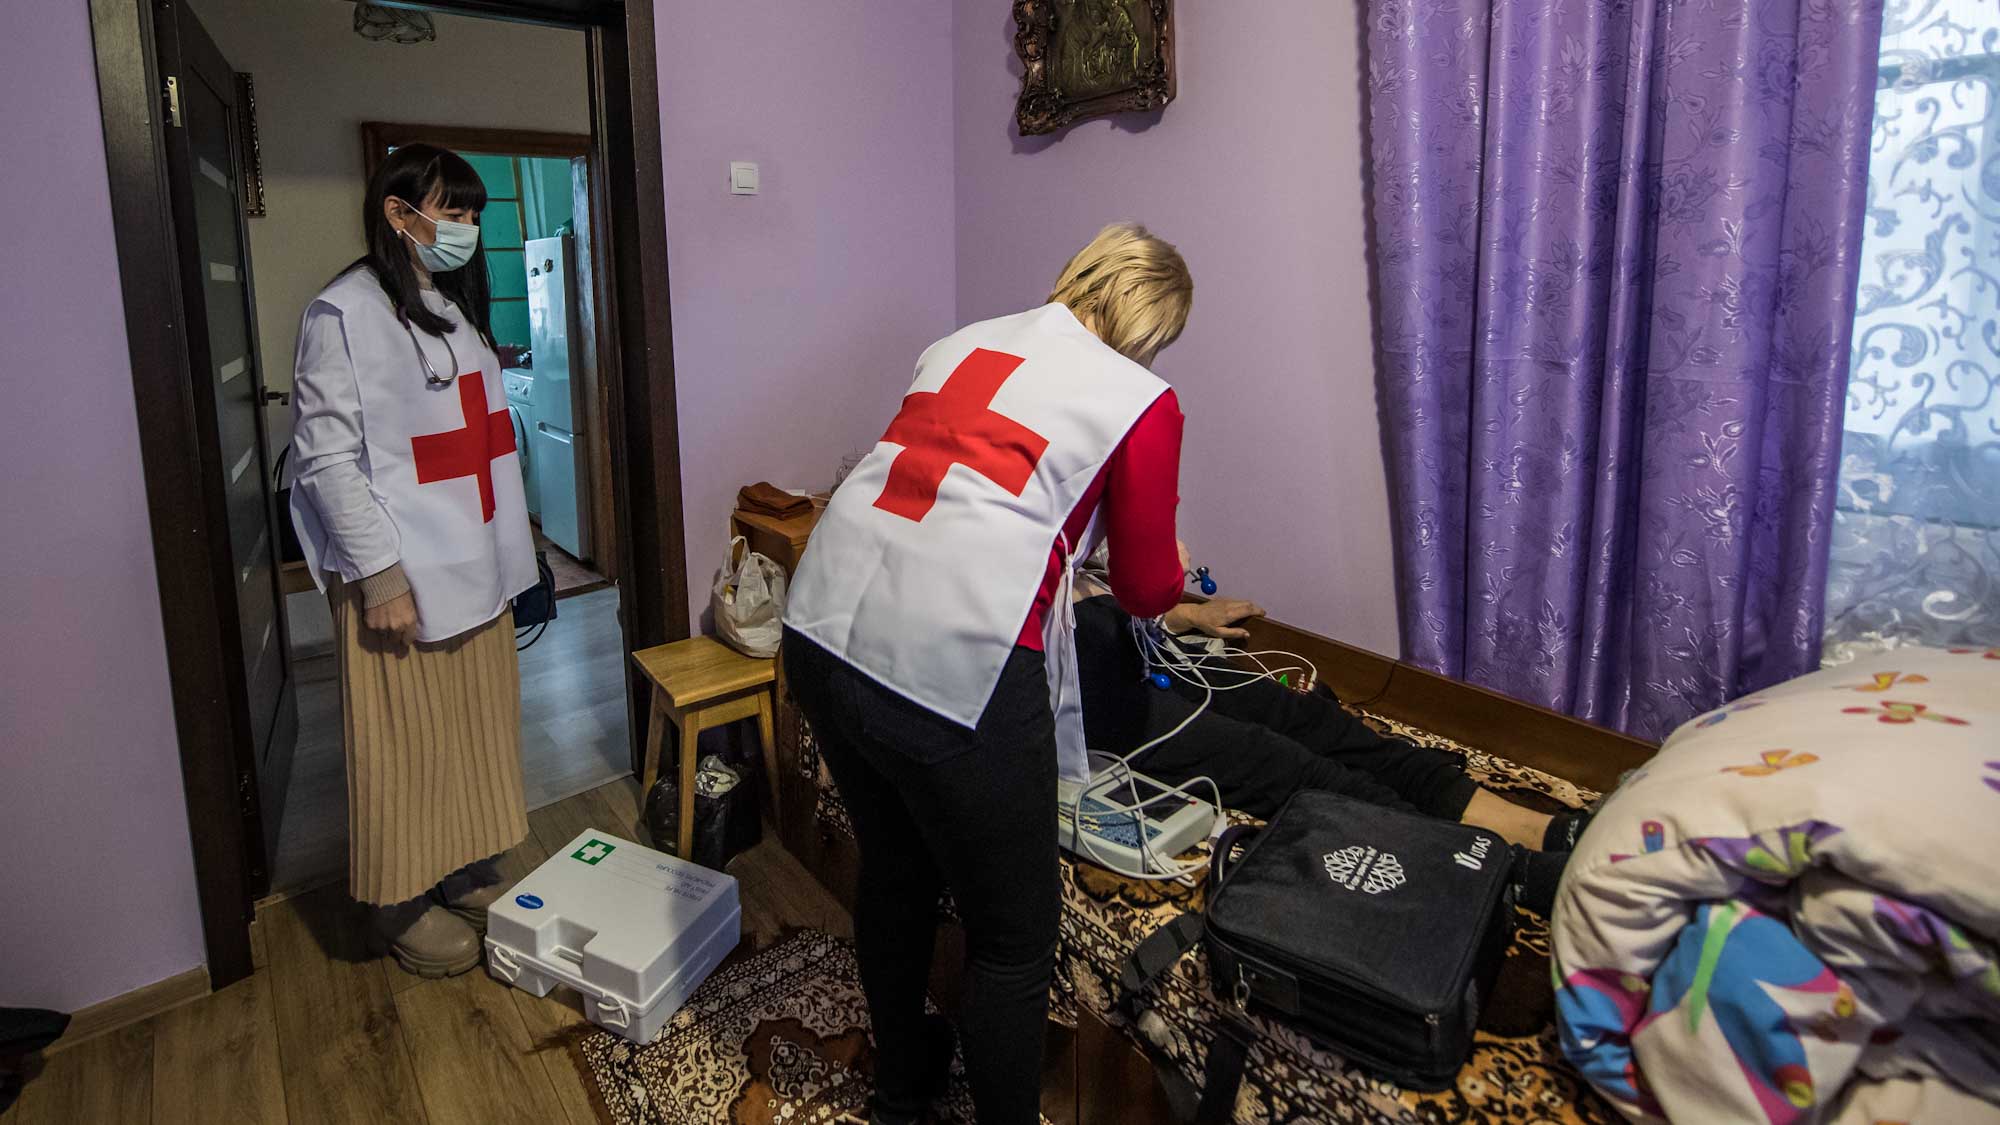 Dr Iryna and nurse Ulyna, help local people/patients by visiting their homes in Cherepyn village, Lviv region.